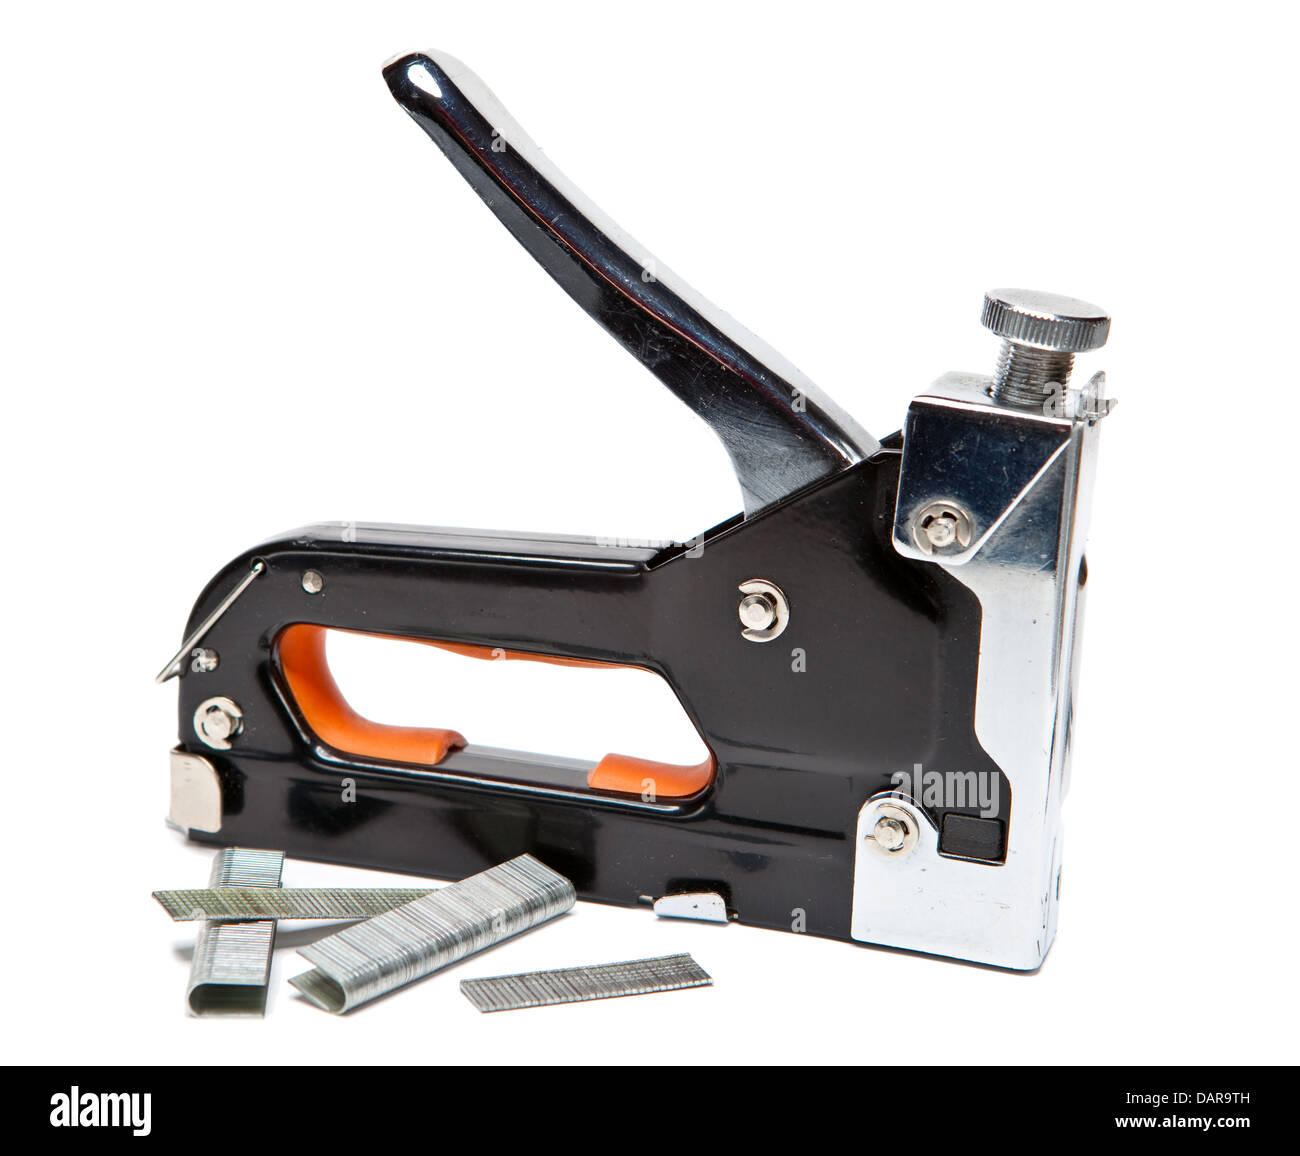 metal stapler for repair work on the house Stock Photo